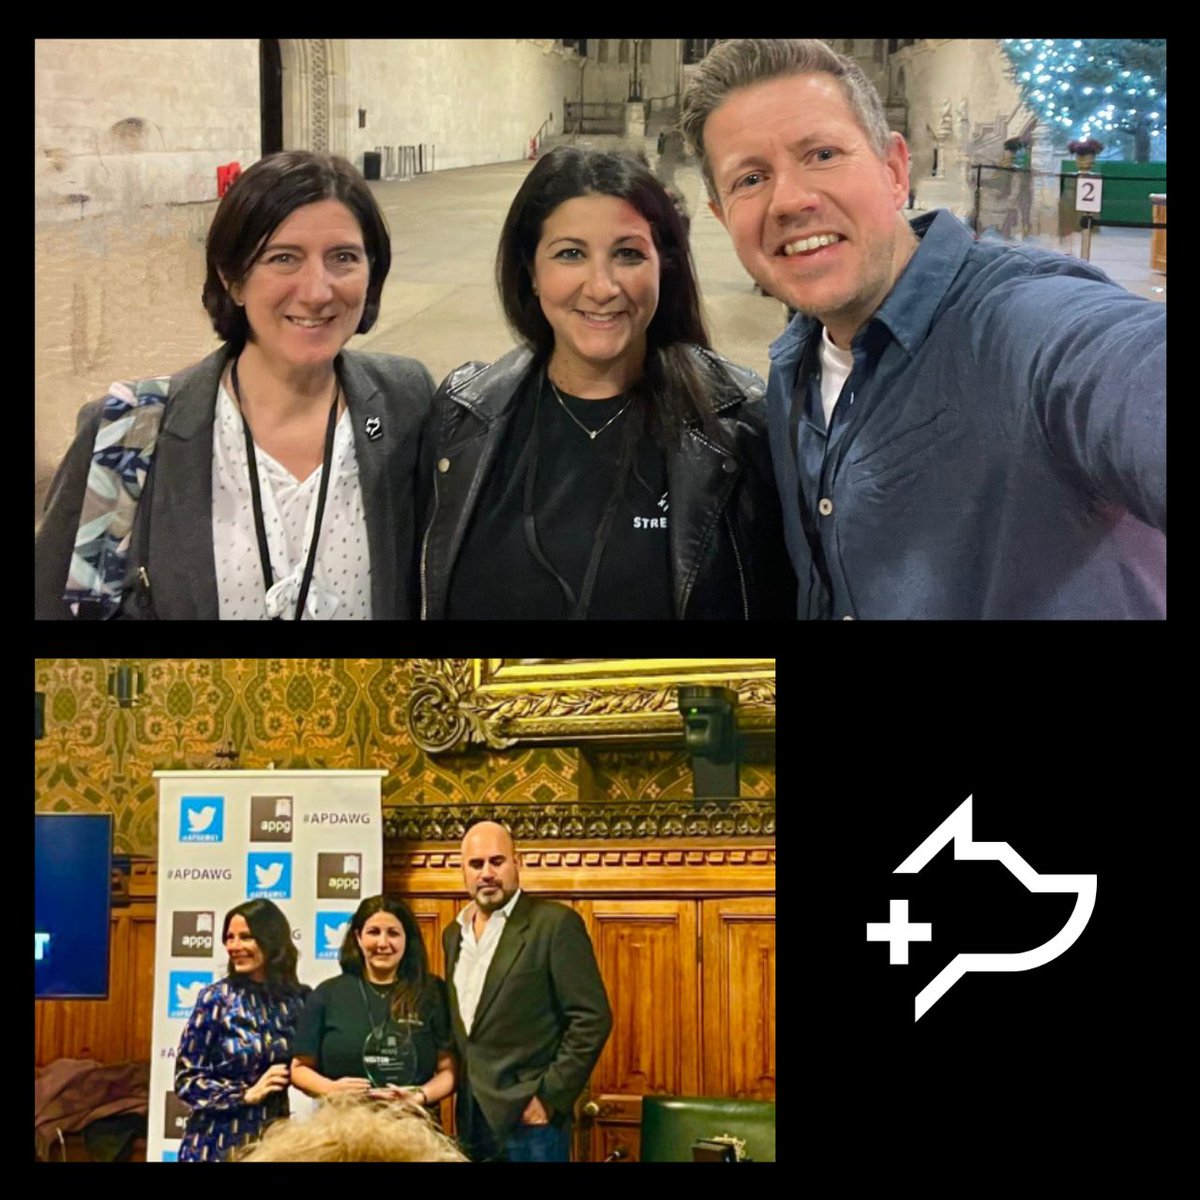 We were thrilled to attend the #APDAWG December meeting in Parliament, joined by @wolfwinkle ✏ Also delighted that StreetVet Co-founder Jade Statt won the Unsung Heroes 2023 & Philippa Robinson Dog Welfare Award 🏆⭐💙 #StreetVet #AnimalCharity #Donate #AwardWinner @APDAWG1